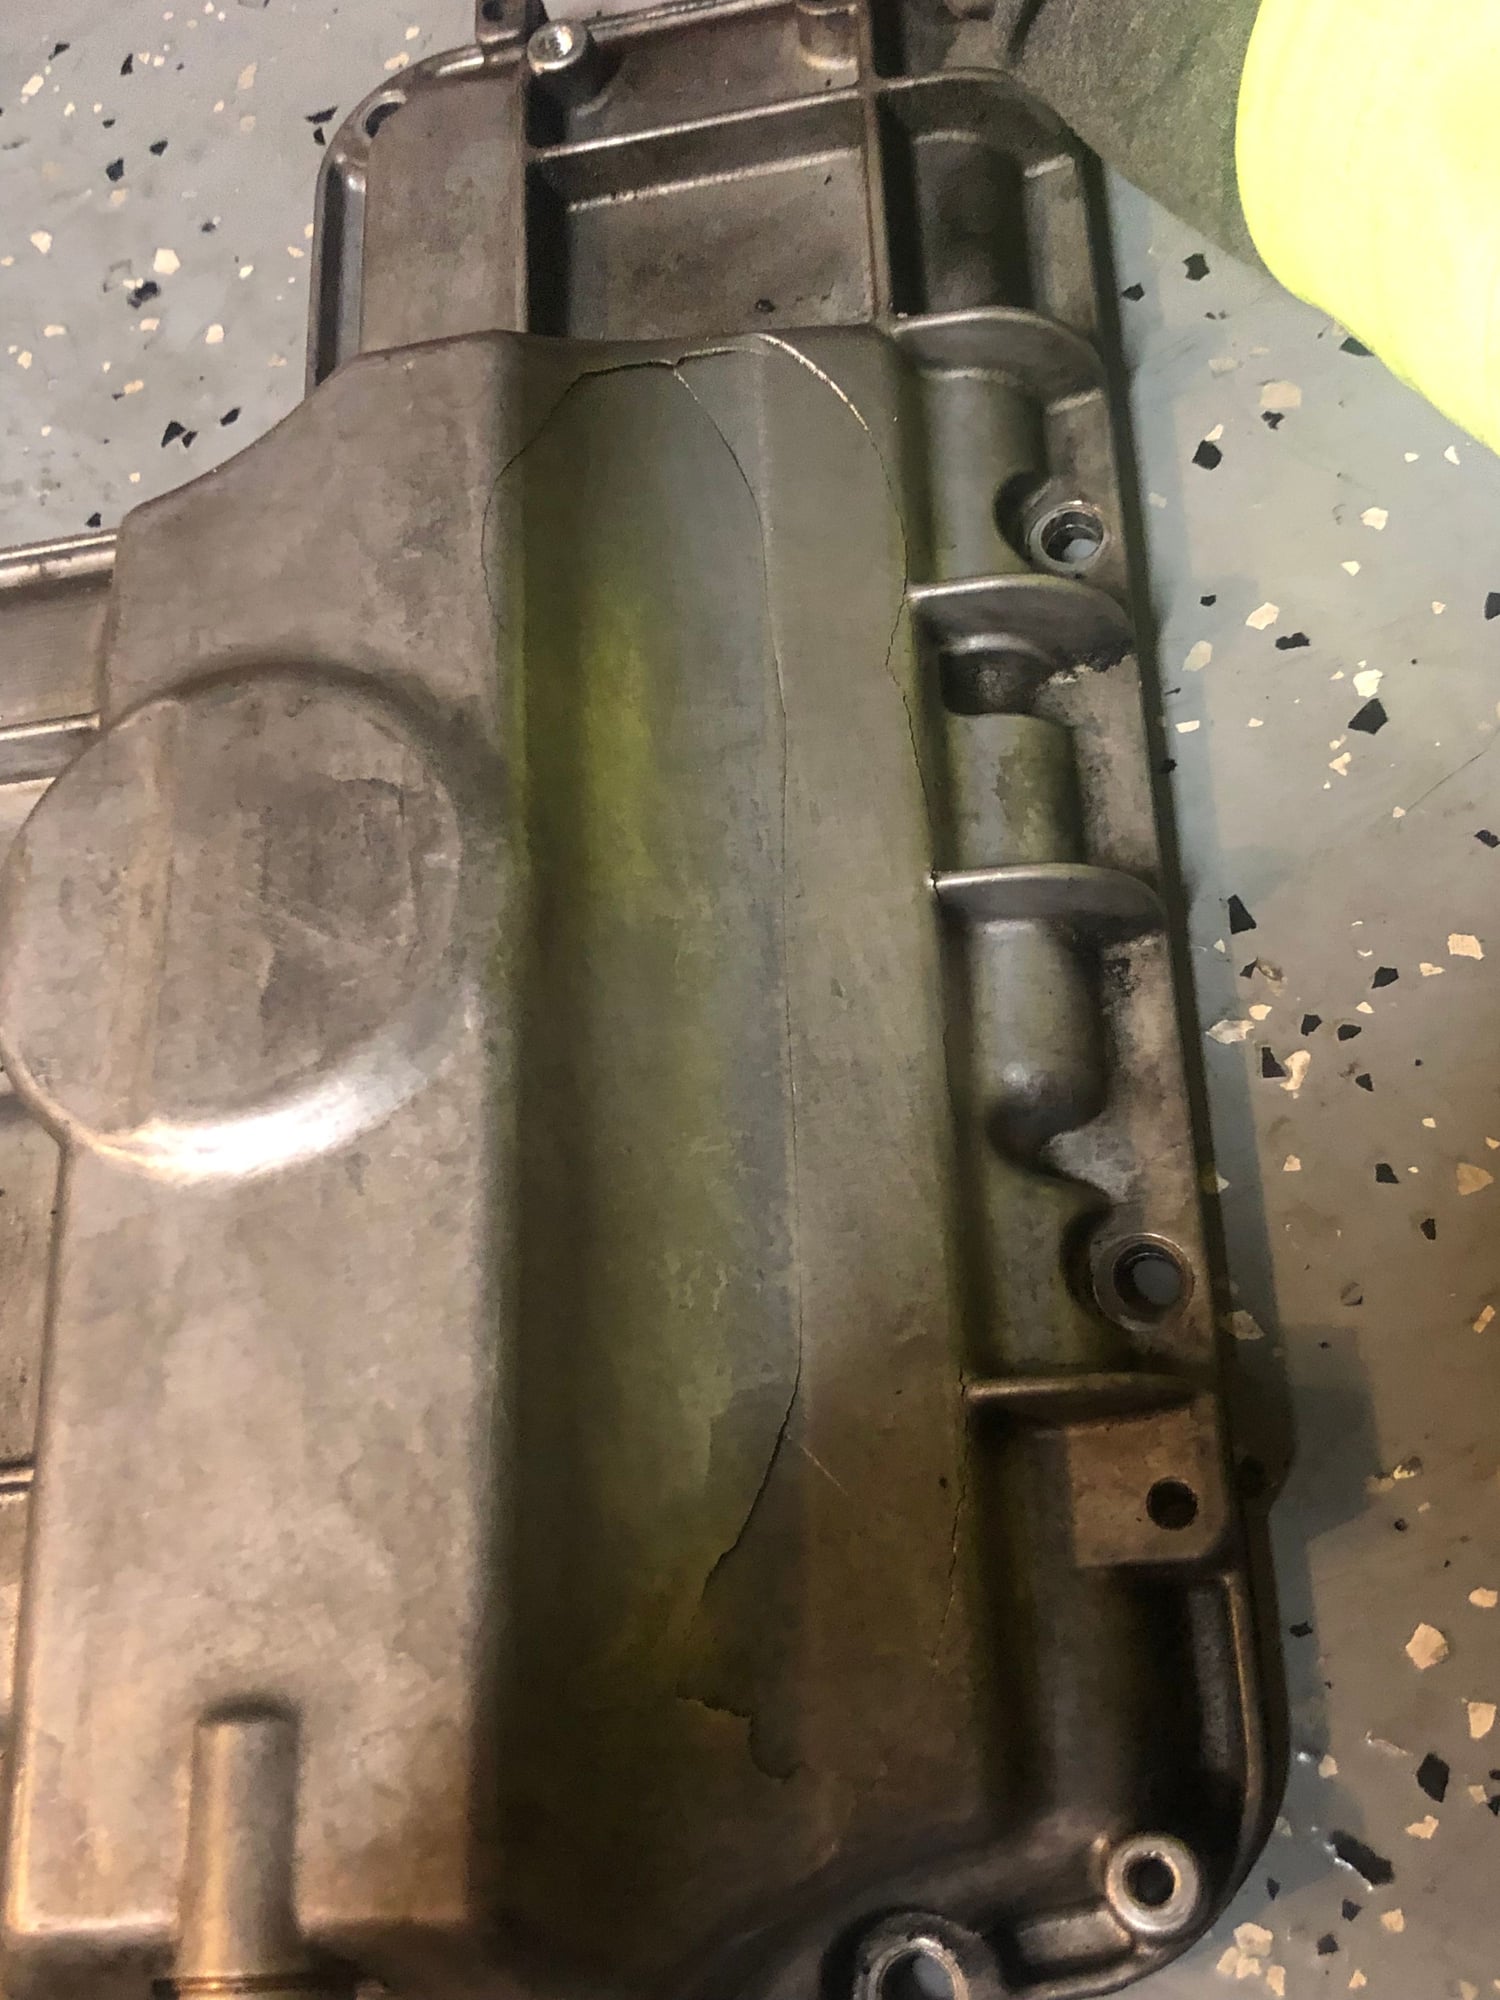 Miscellaneous - WTB: Engine lower oil pan for 2005 e55 amg - Used - 2003 to 2006 Mercedes-Benz E55 AMG - Las Vegas, NV 89128, United States